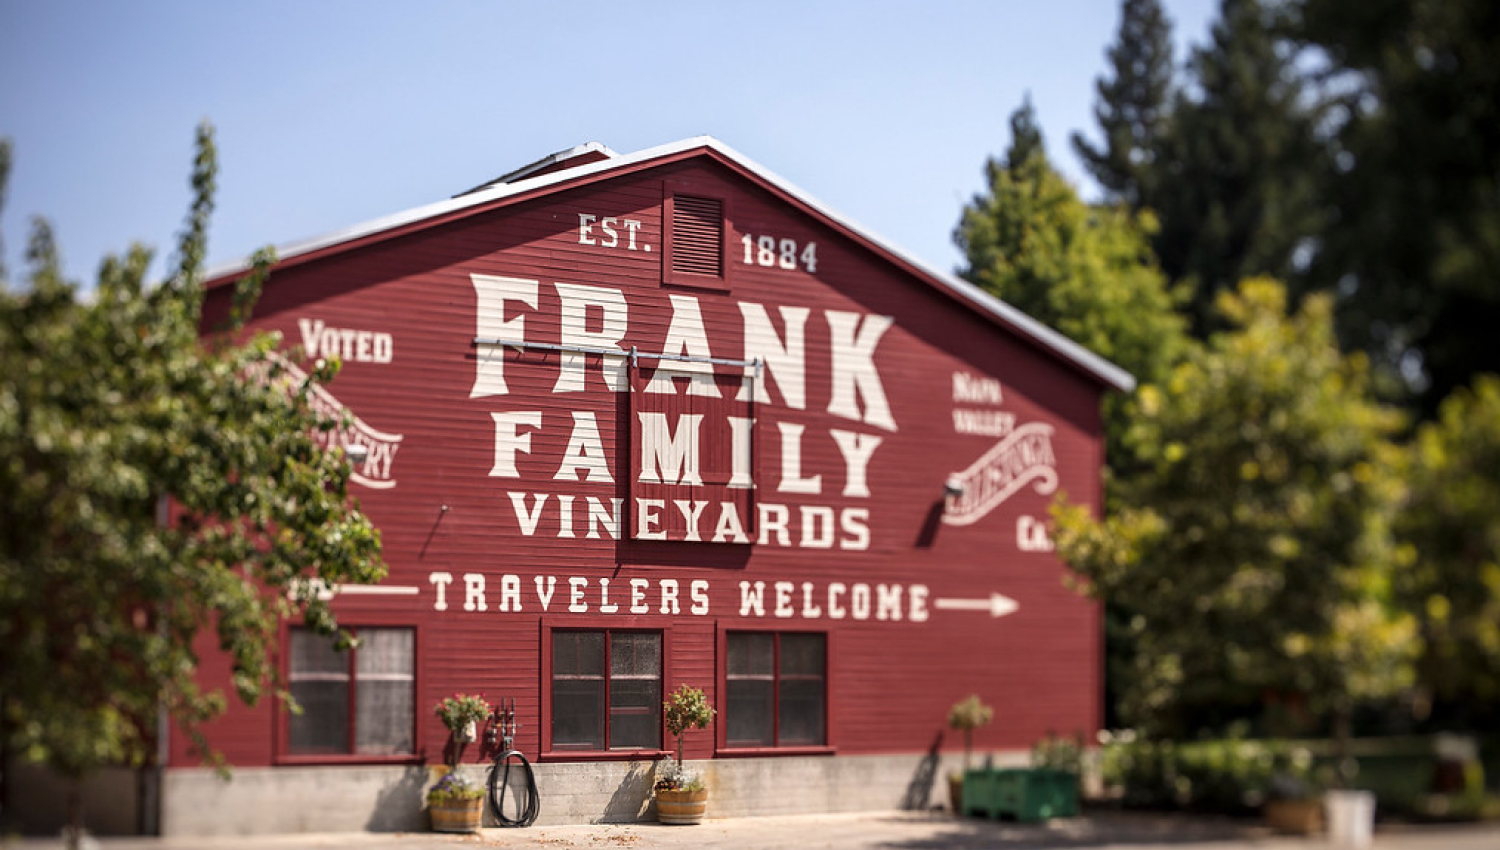 Frank Family Vineyards, Travelers Welcome printed on a building.